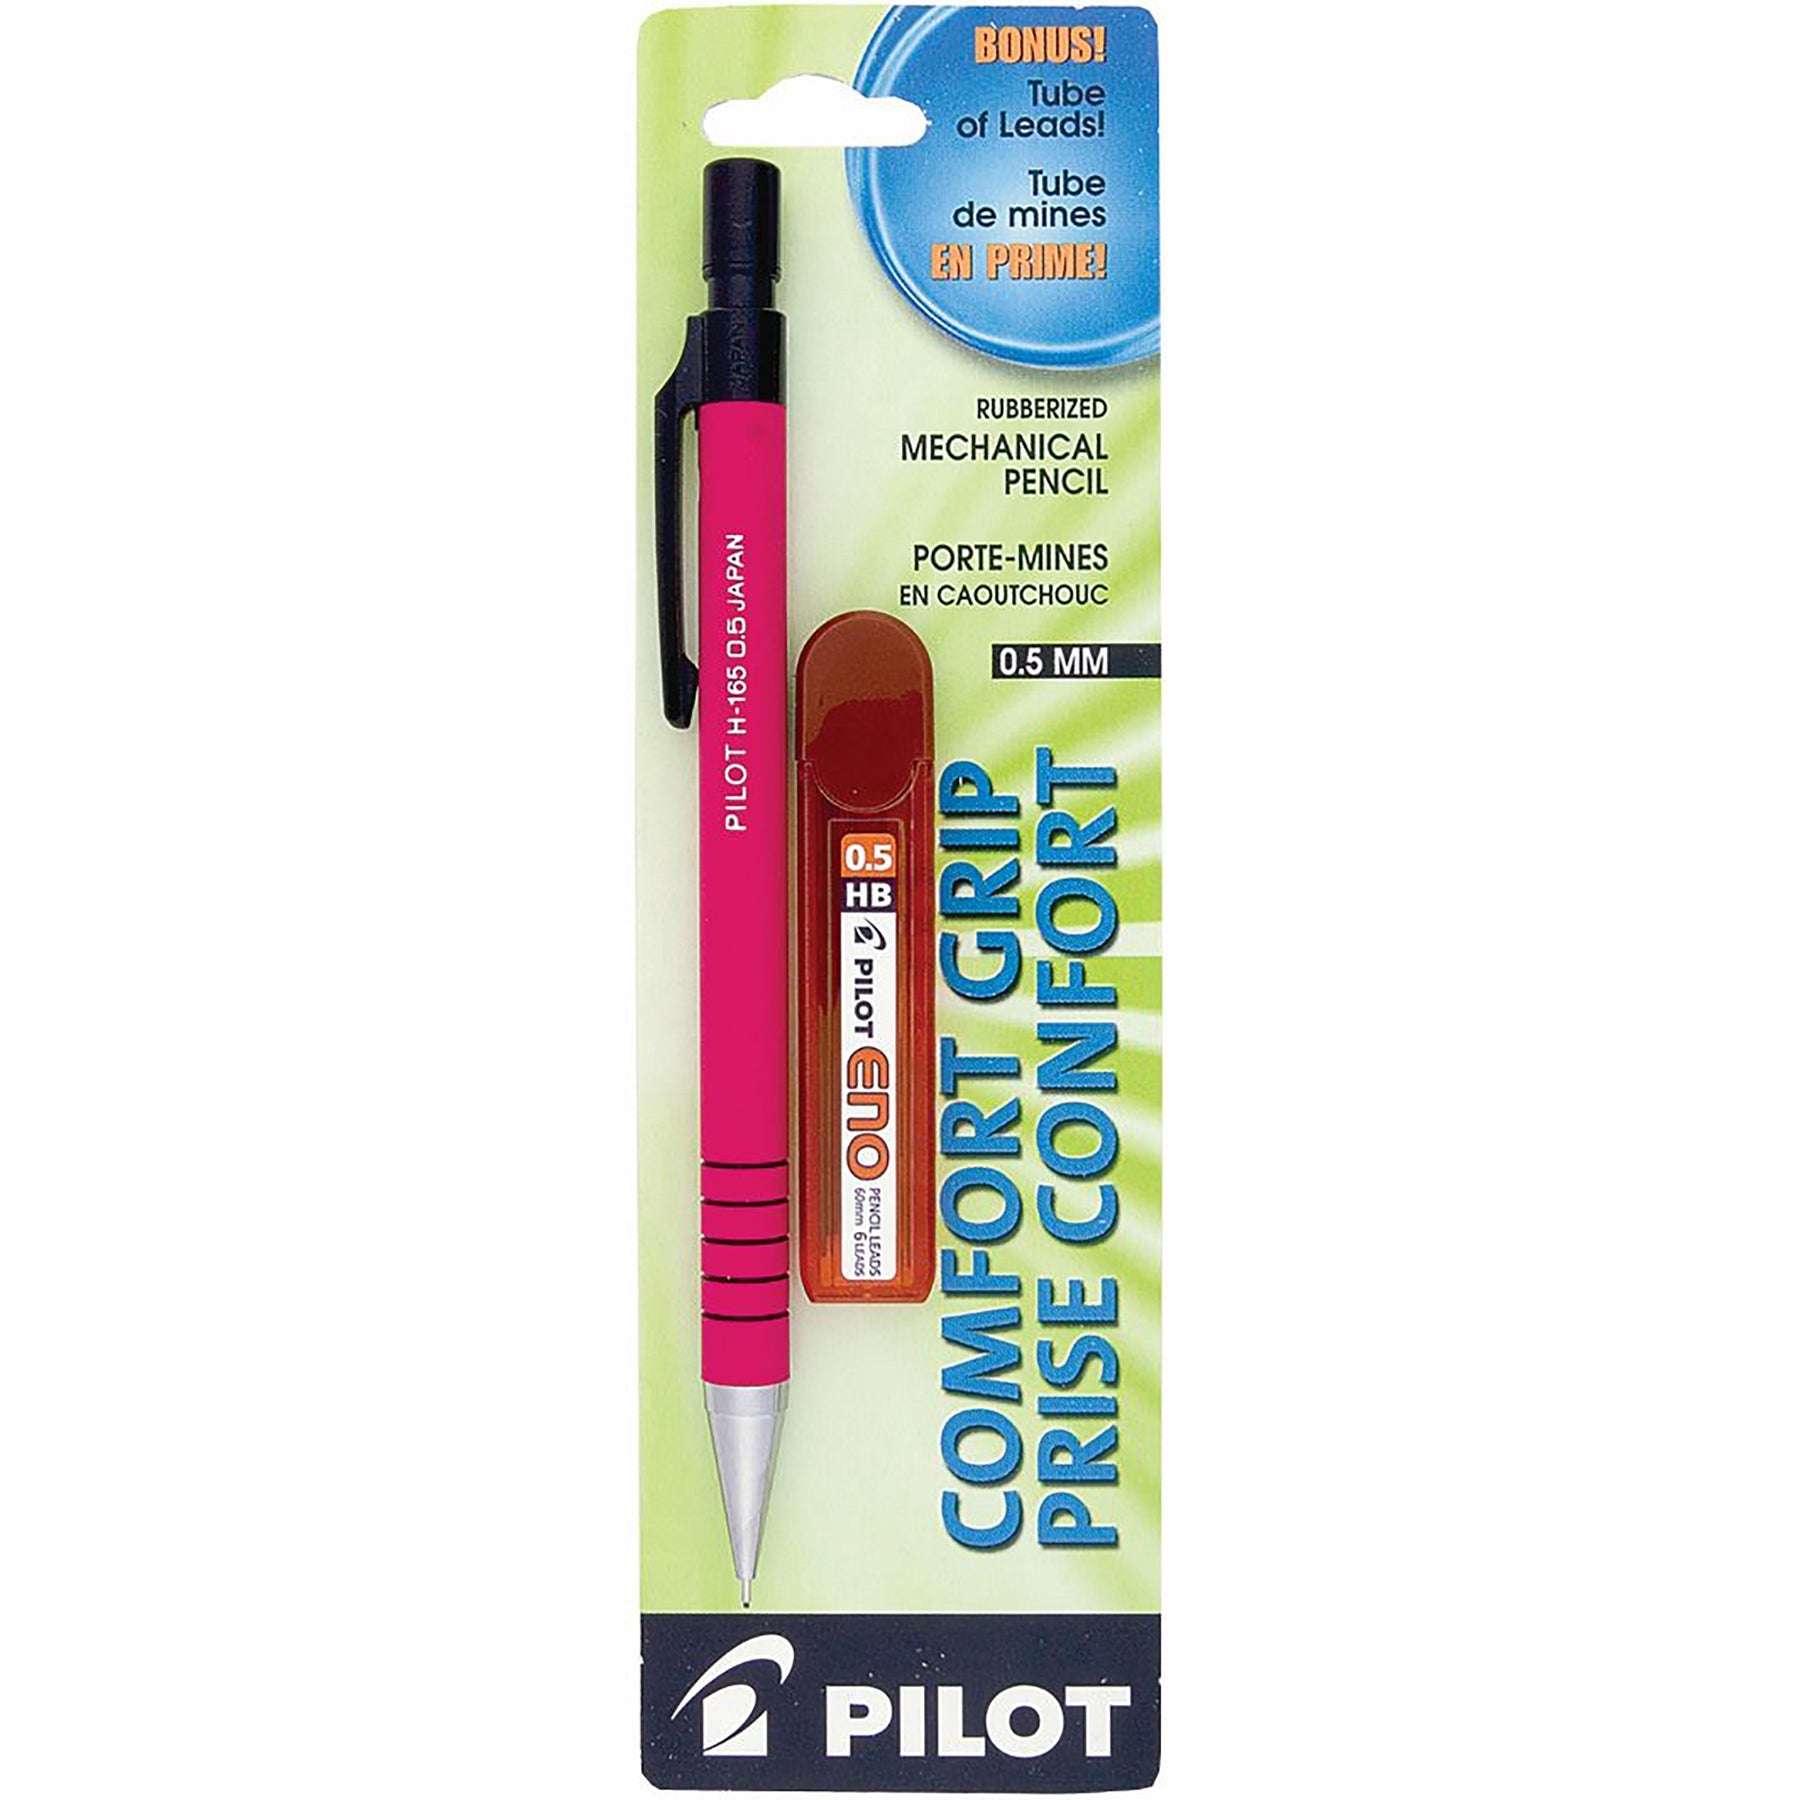 Pilot Mechanical Pencil with Leads 0.5mm